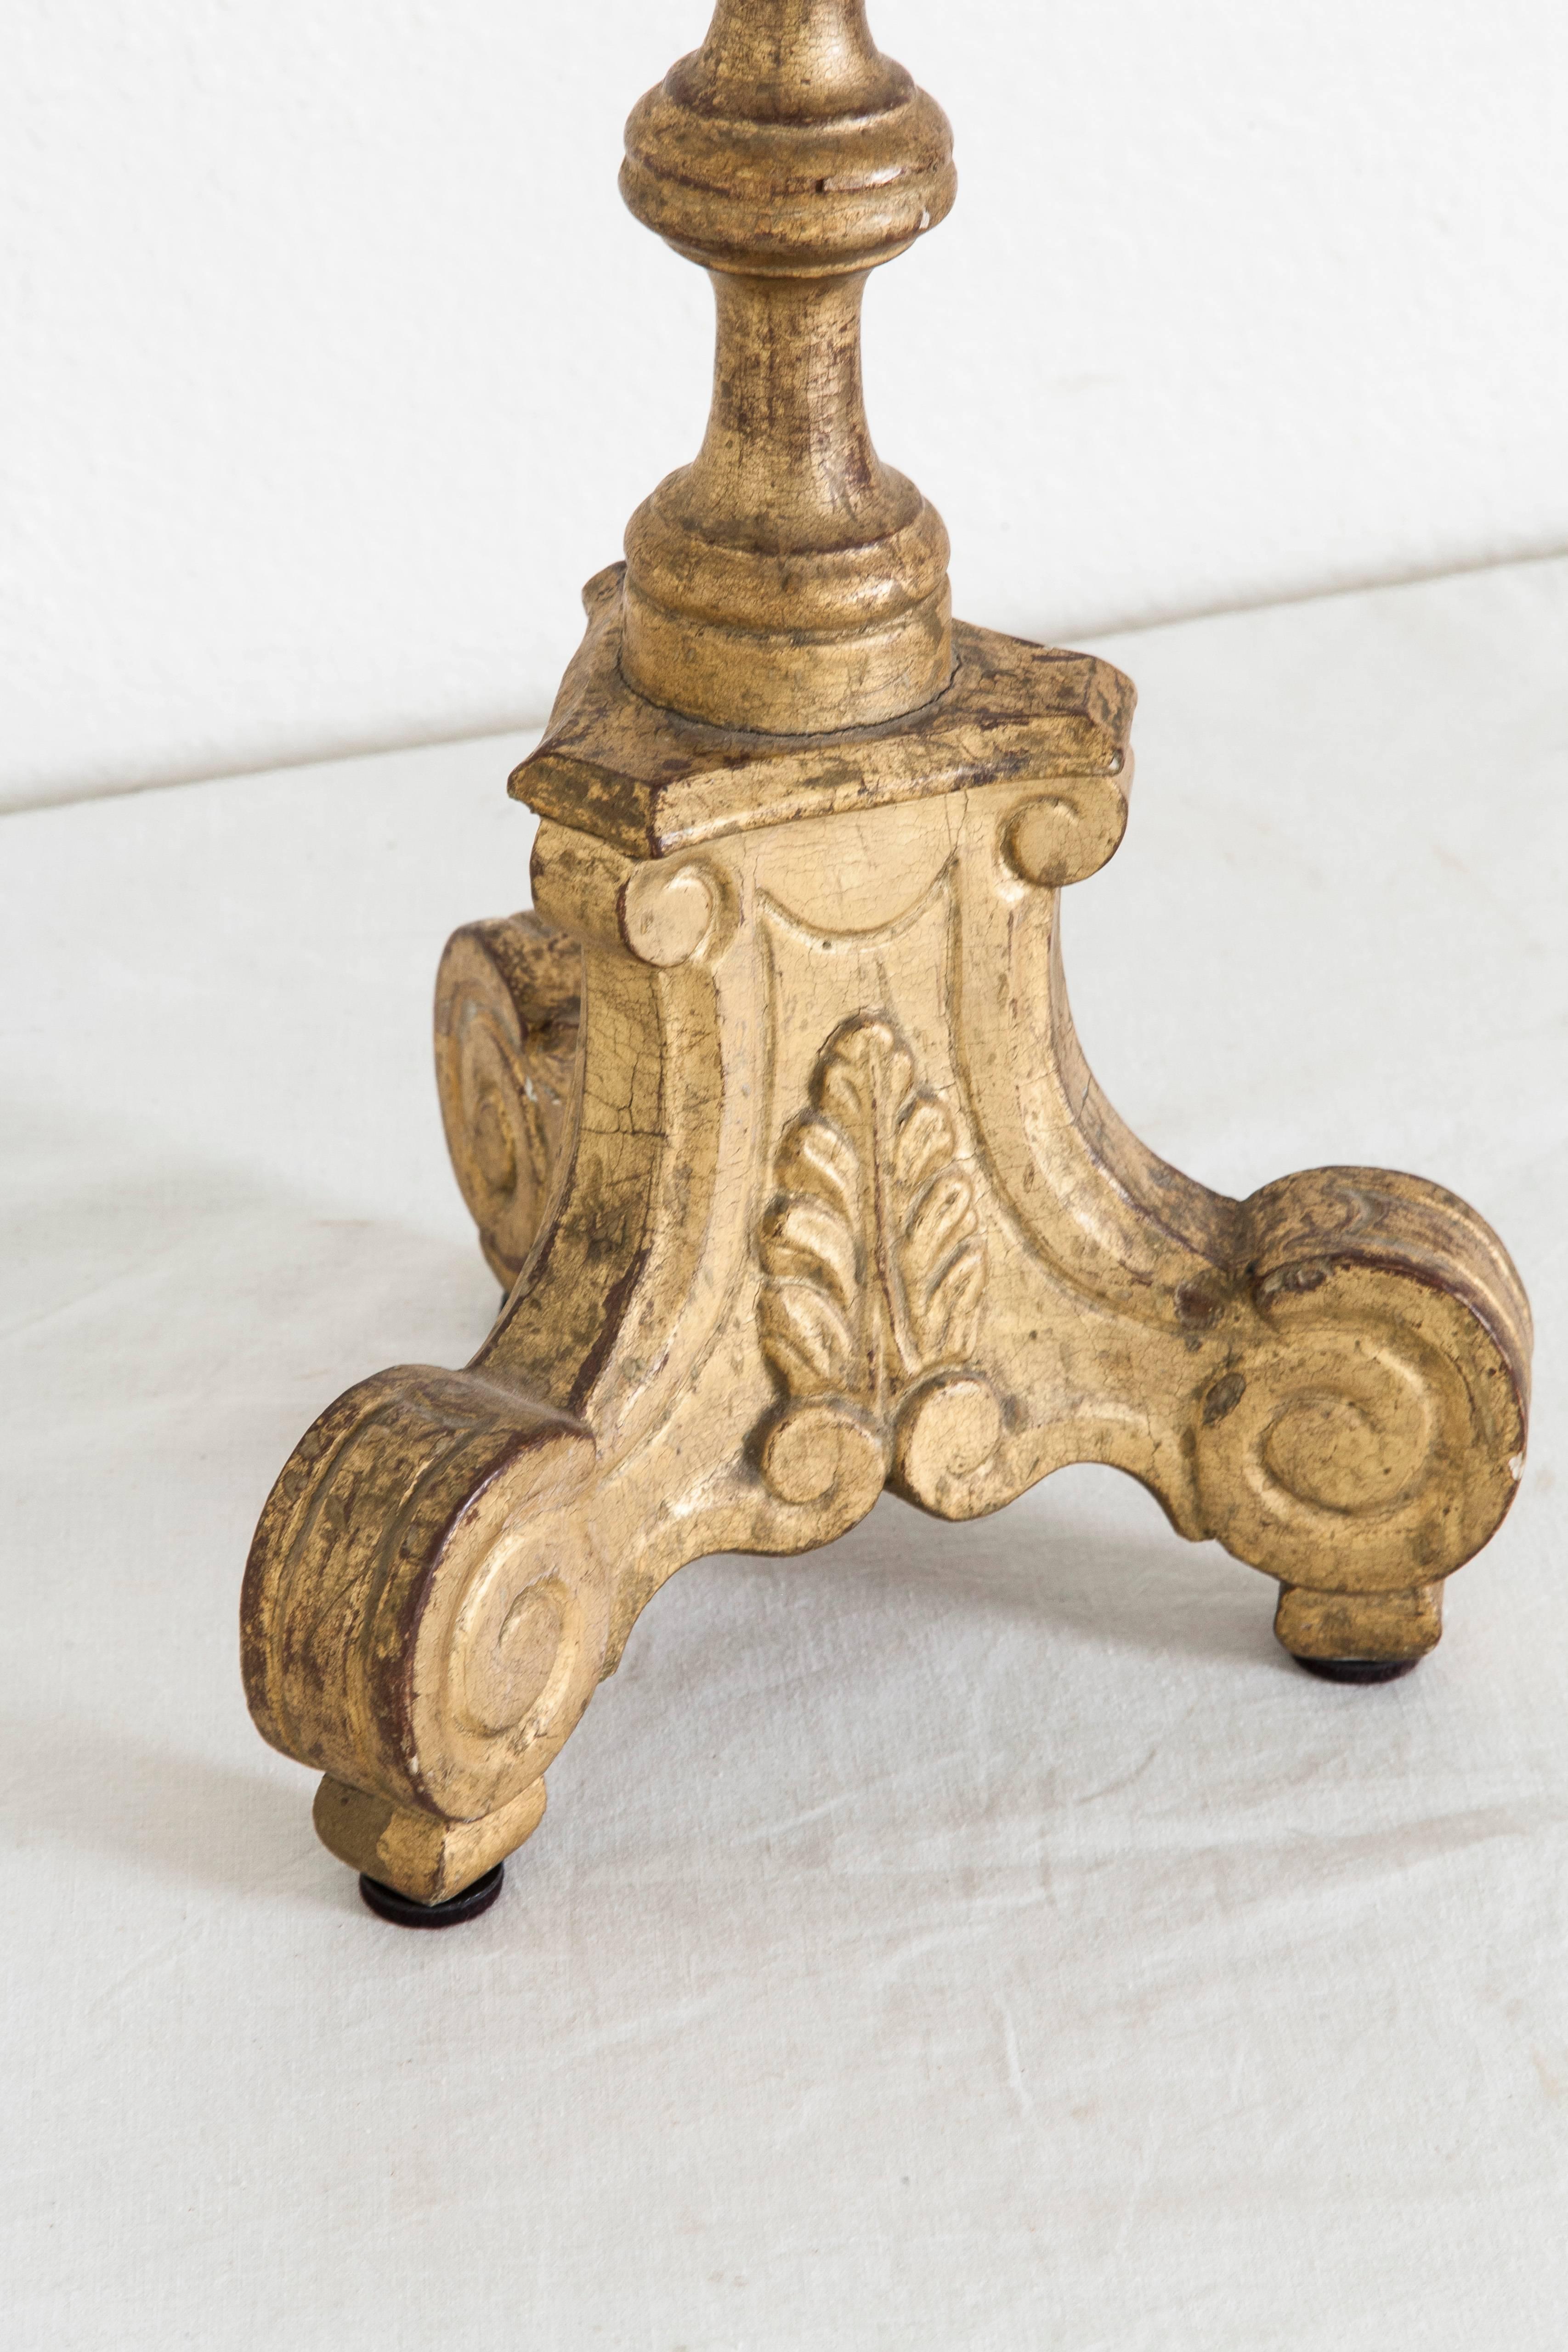 18th Century French Giltwood Pricket or Candlestick from a Chateau Chapel Altar 1